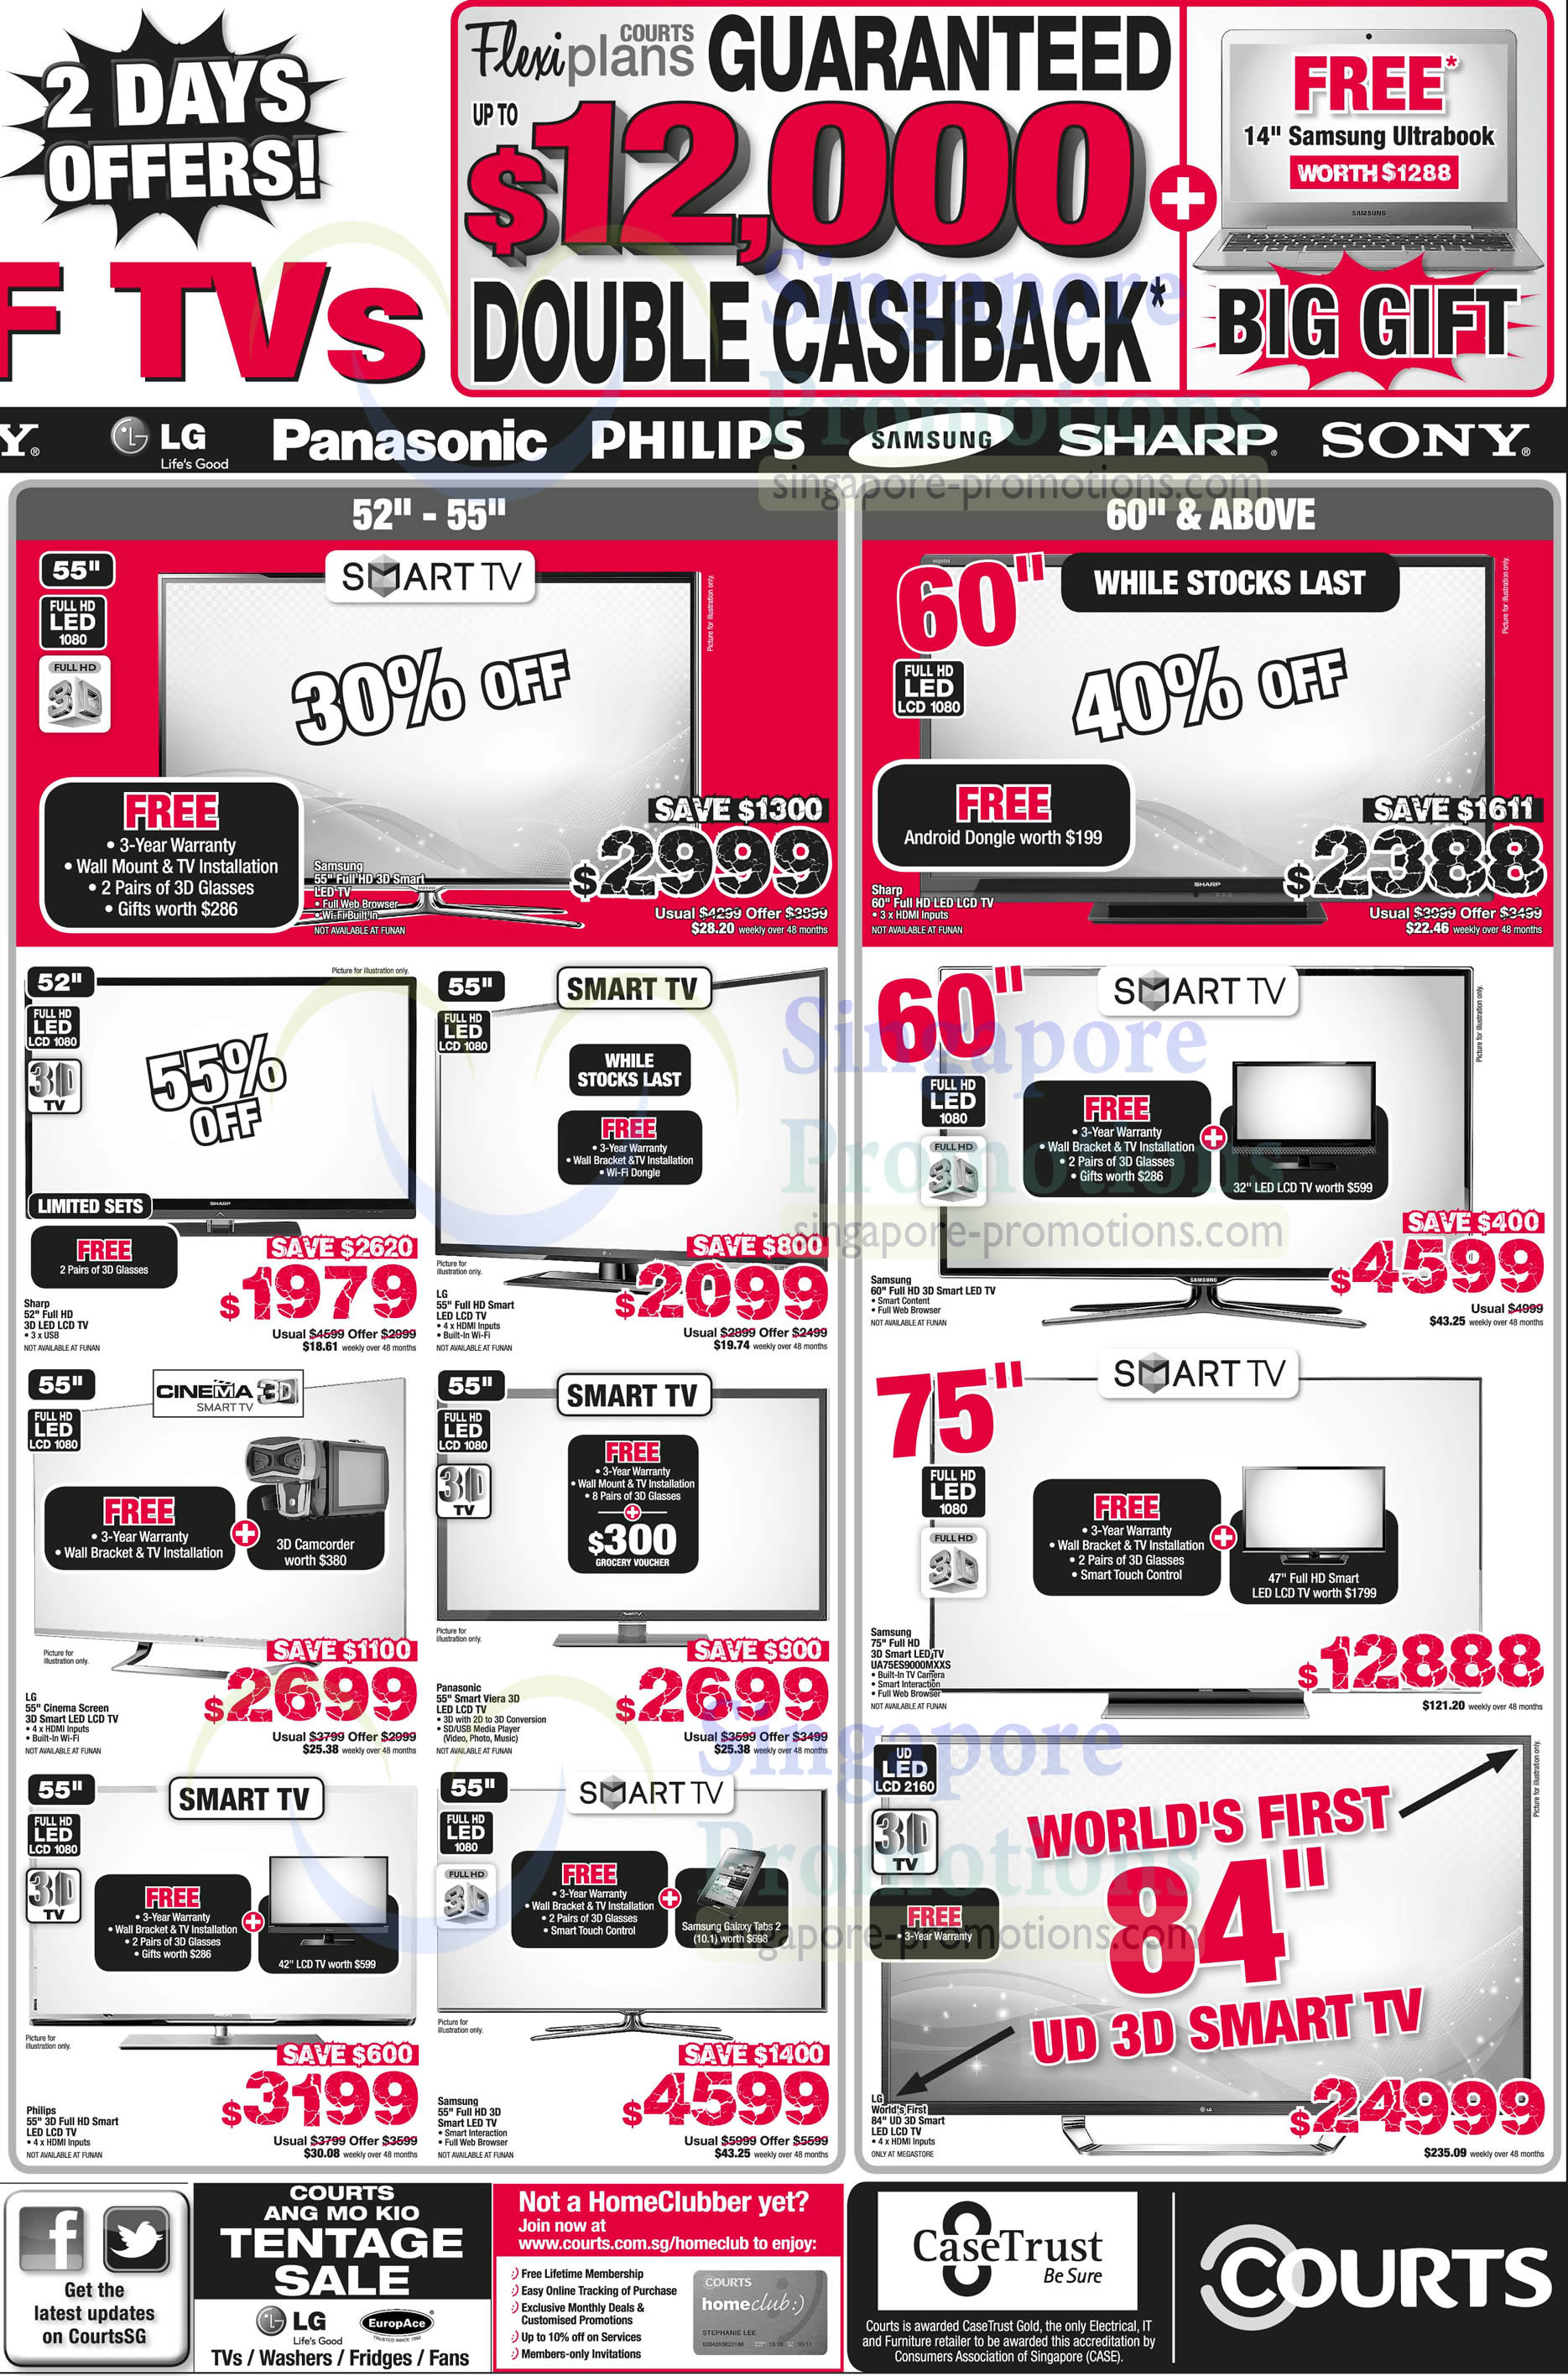 Featured image for Courts Big Brand Sale Promotion Offers 20 – 21 Oct 2012